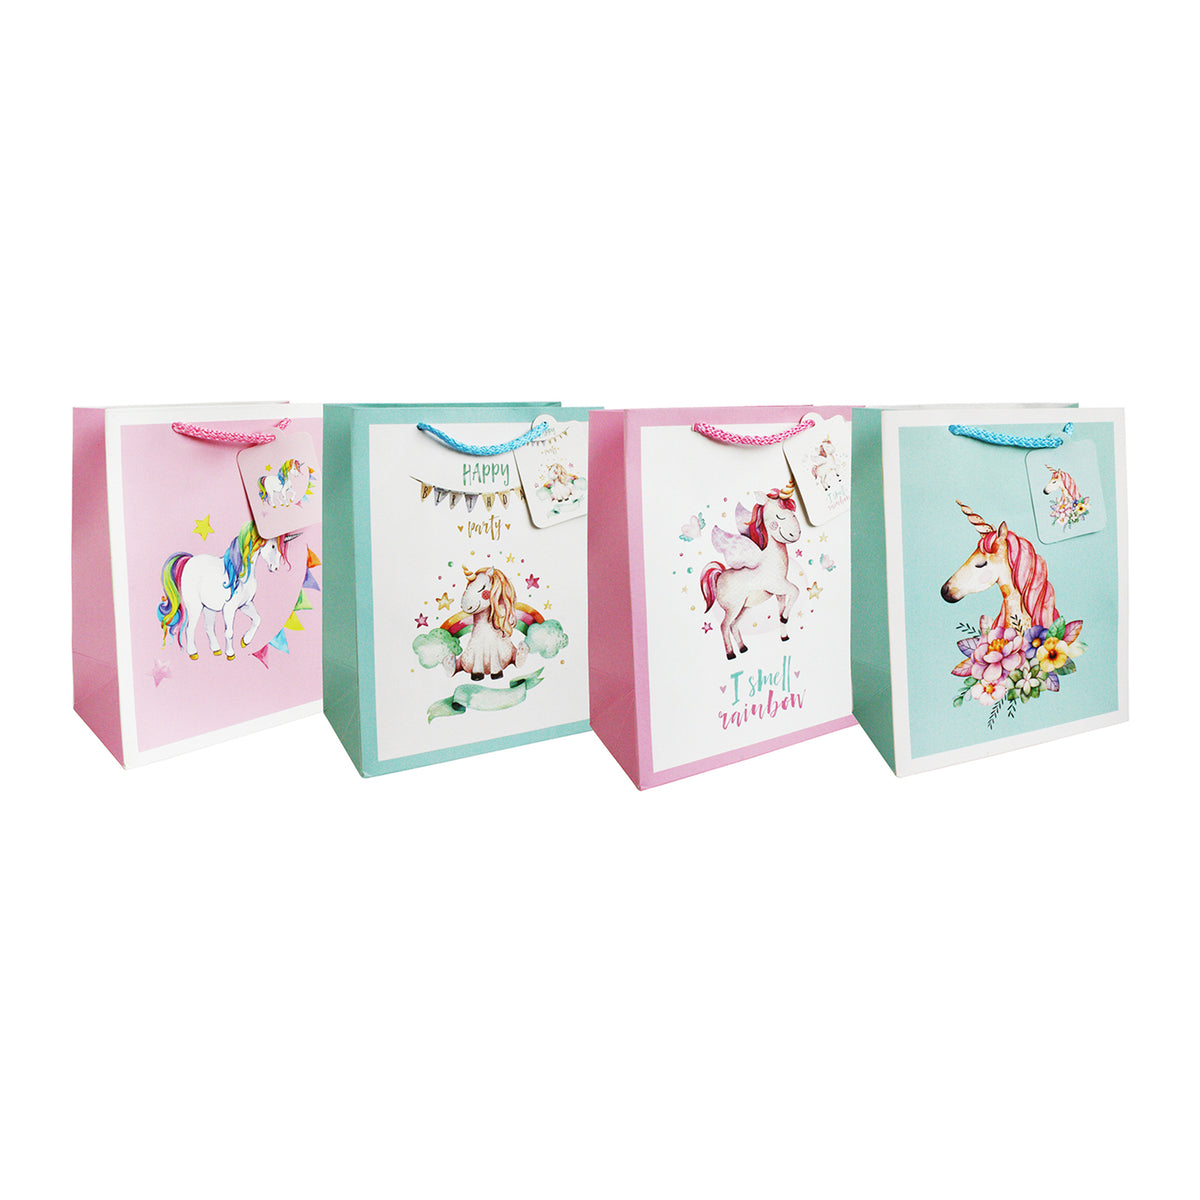 Magical Unicorn-Themed Gift Bags - Set Of 4, Assorted Designs (Sizes Available)